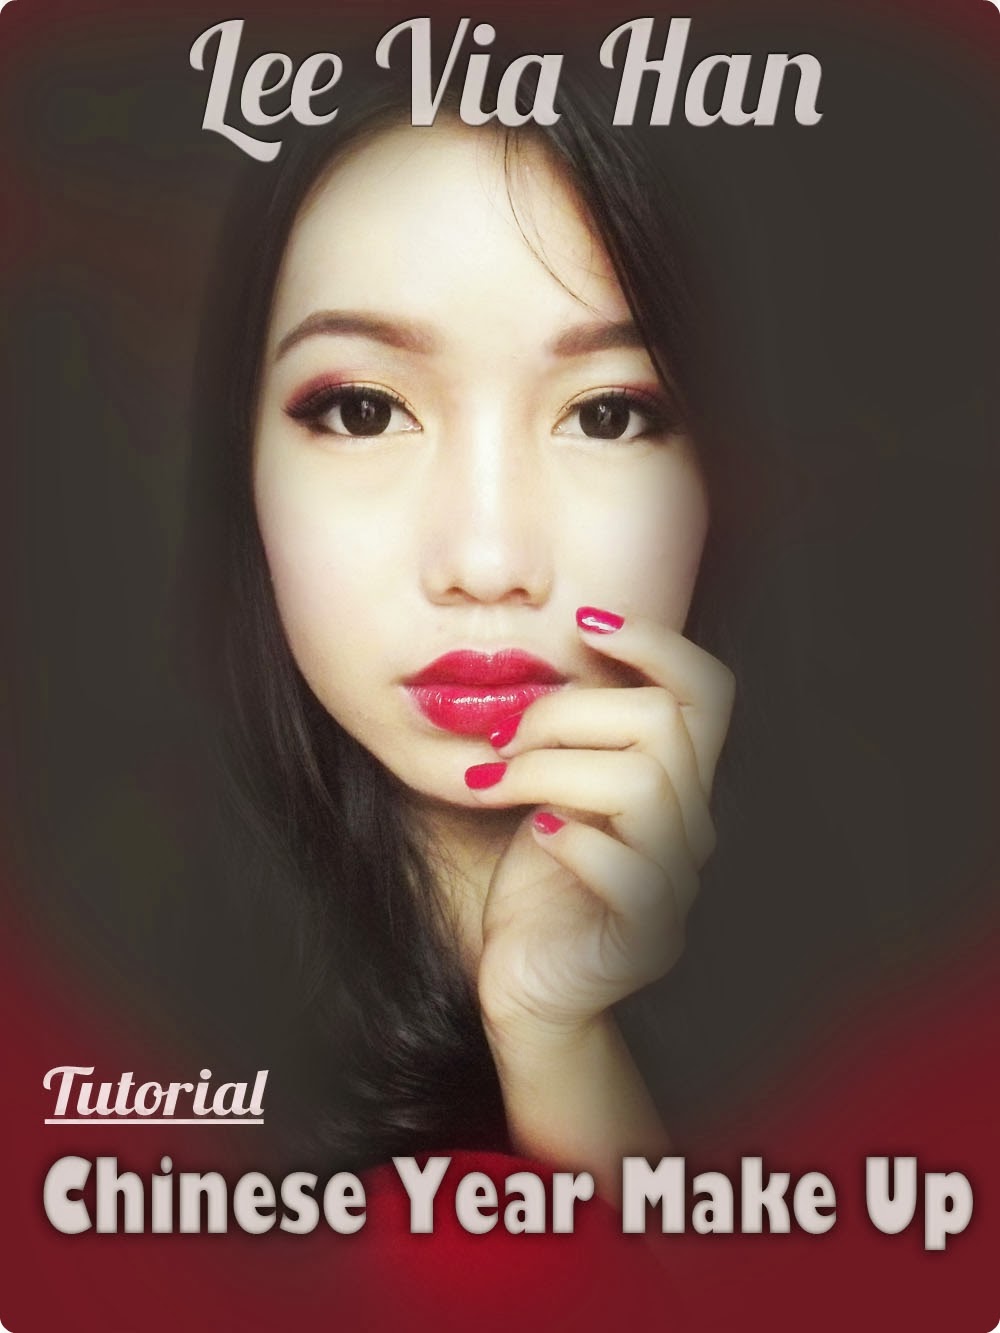 Beauty Blogger Indonesia By Lee Via Han TUTORIAL Chinese New Year